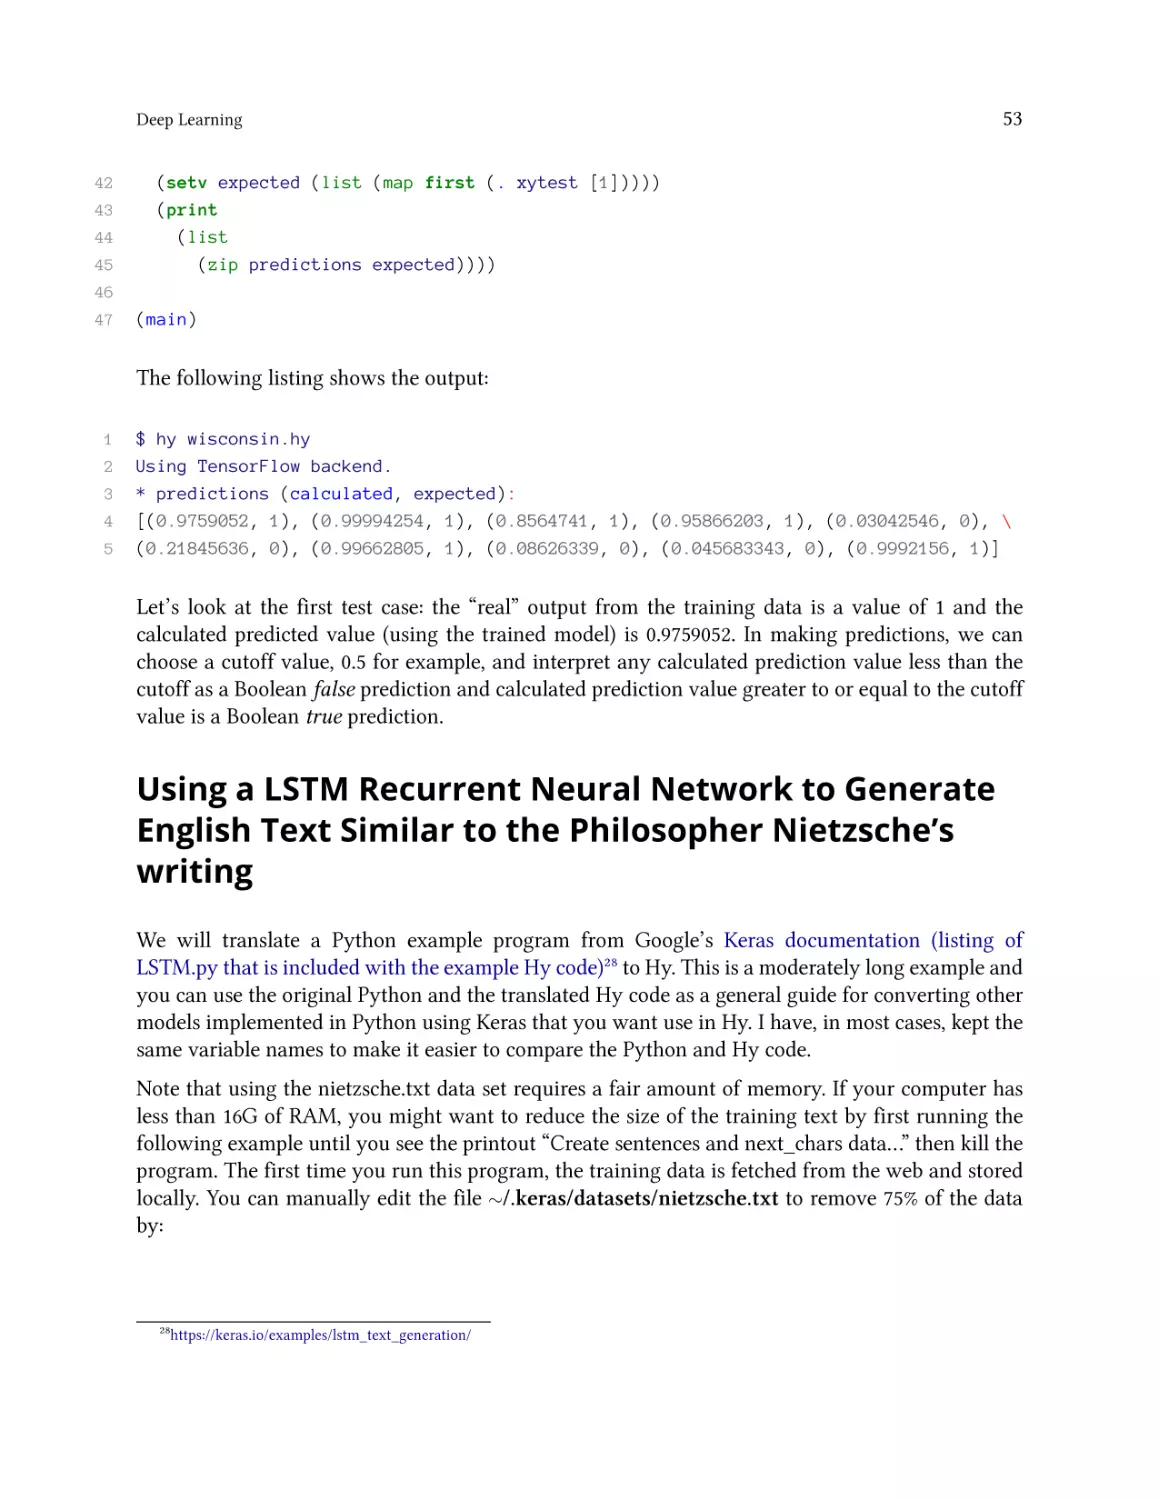 Using a LSTM Recurrent Neural Network to Generate English Text Similar to the Philosopher Nietzsche's writing